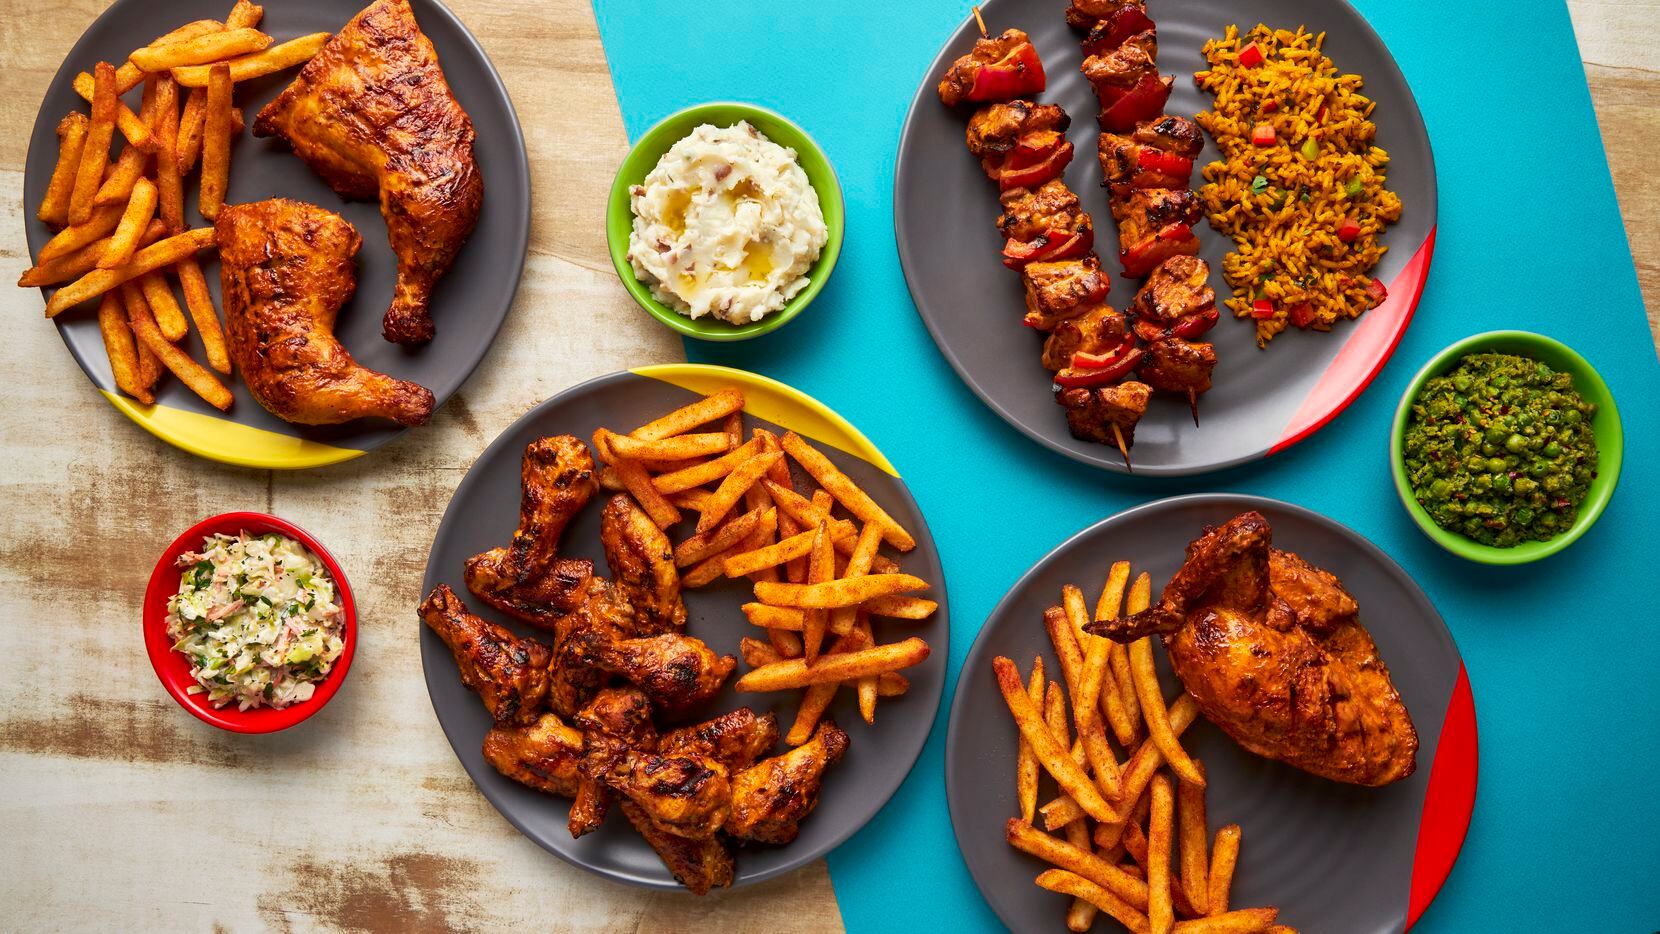 At Nando's Peri-Peri, you can order chicken platters, skewers and more.